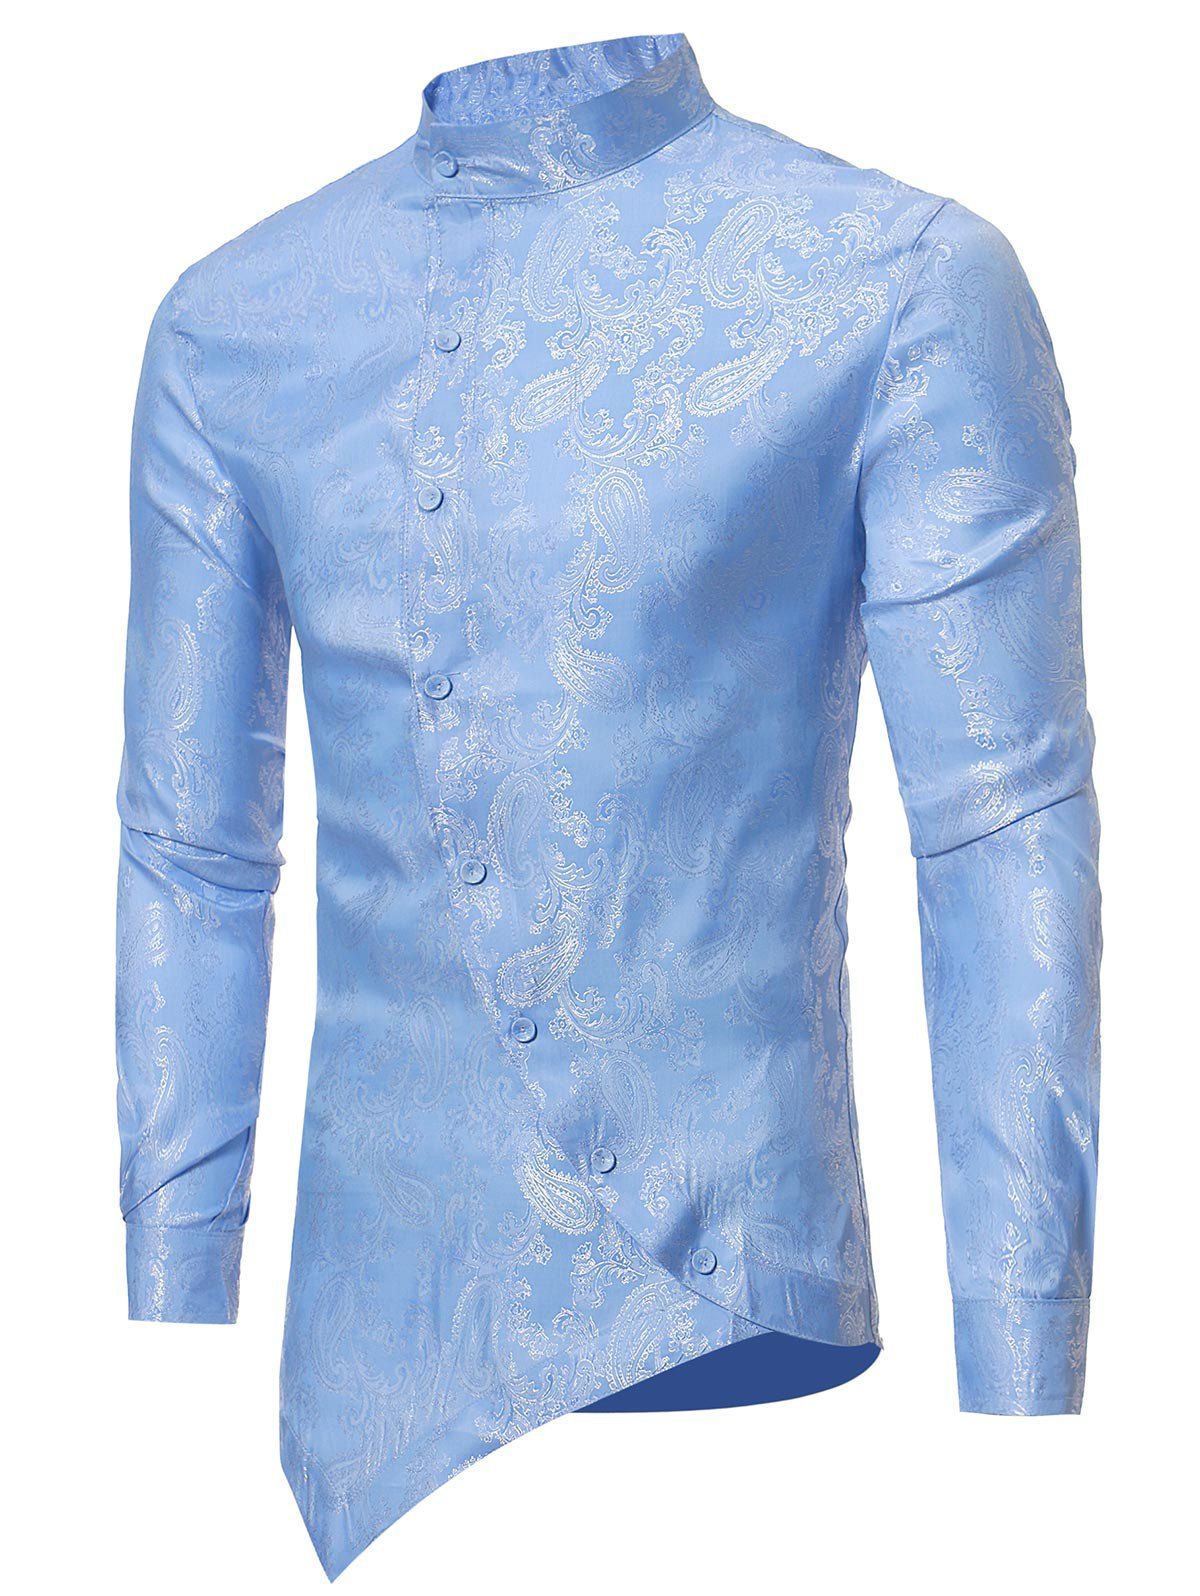 [33% OFF] 2021 Ethnic Paisley Pattern Long Sleeves Shirt In LIGHT BLUE ...